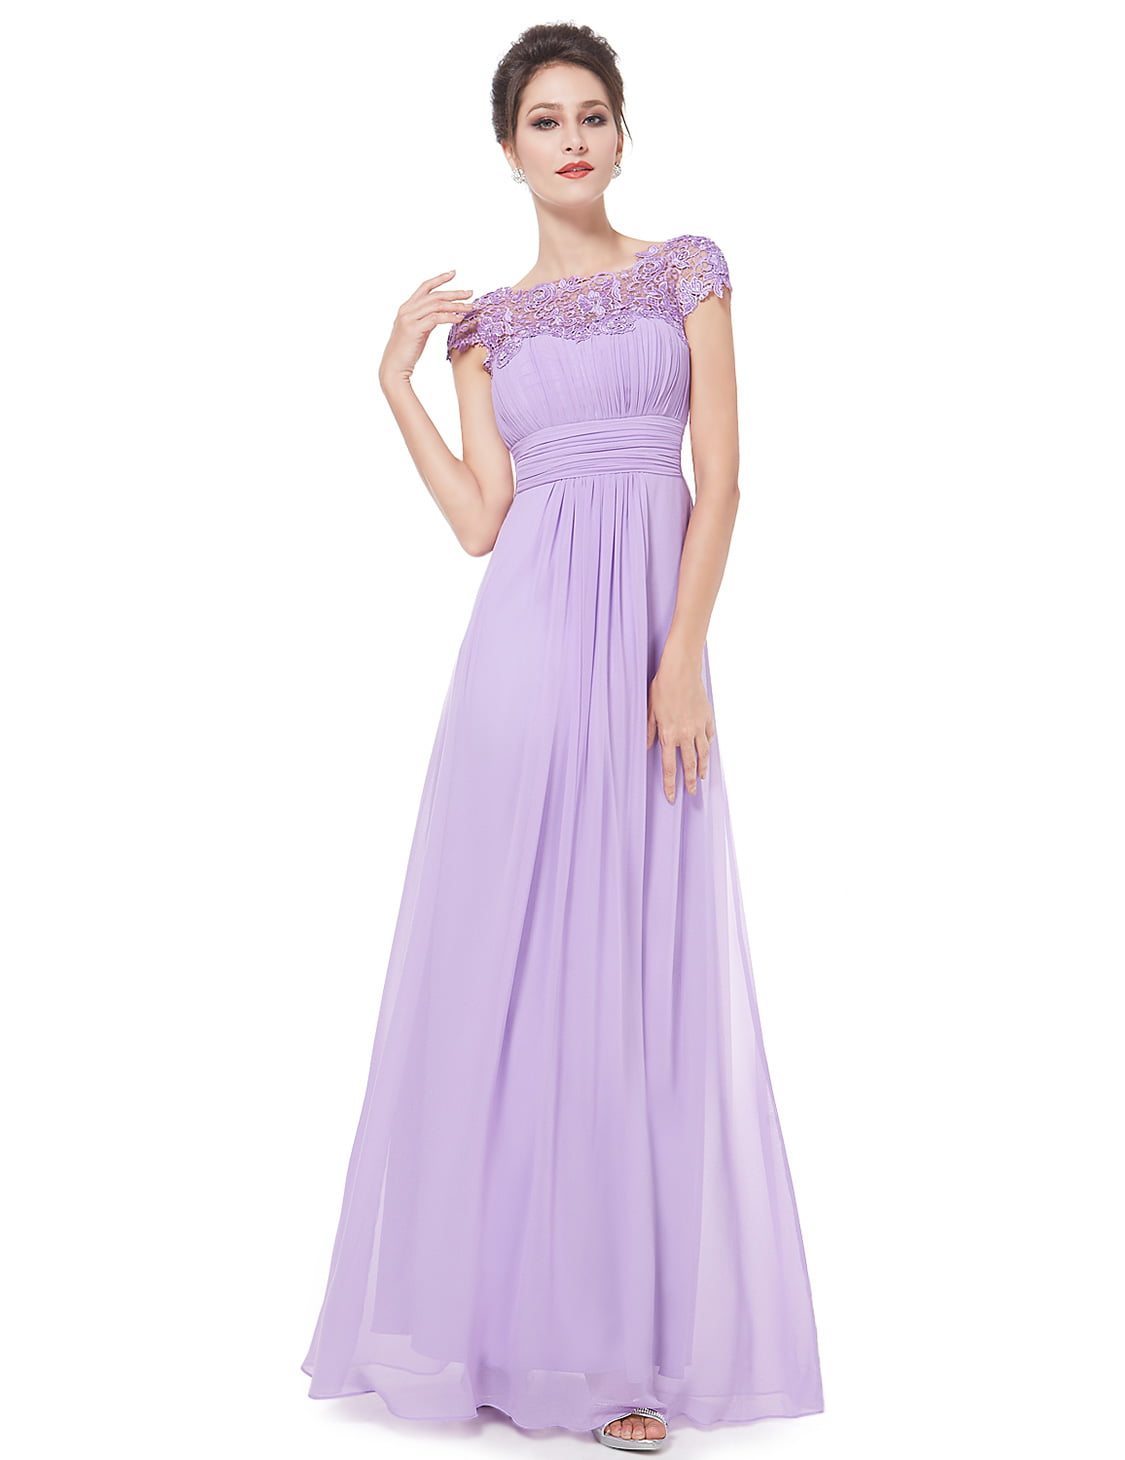 Ever-Pretty US Women's A-Line Cap Sleeve Long Evening Party Prom Dresses Gowns